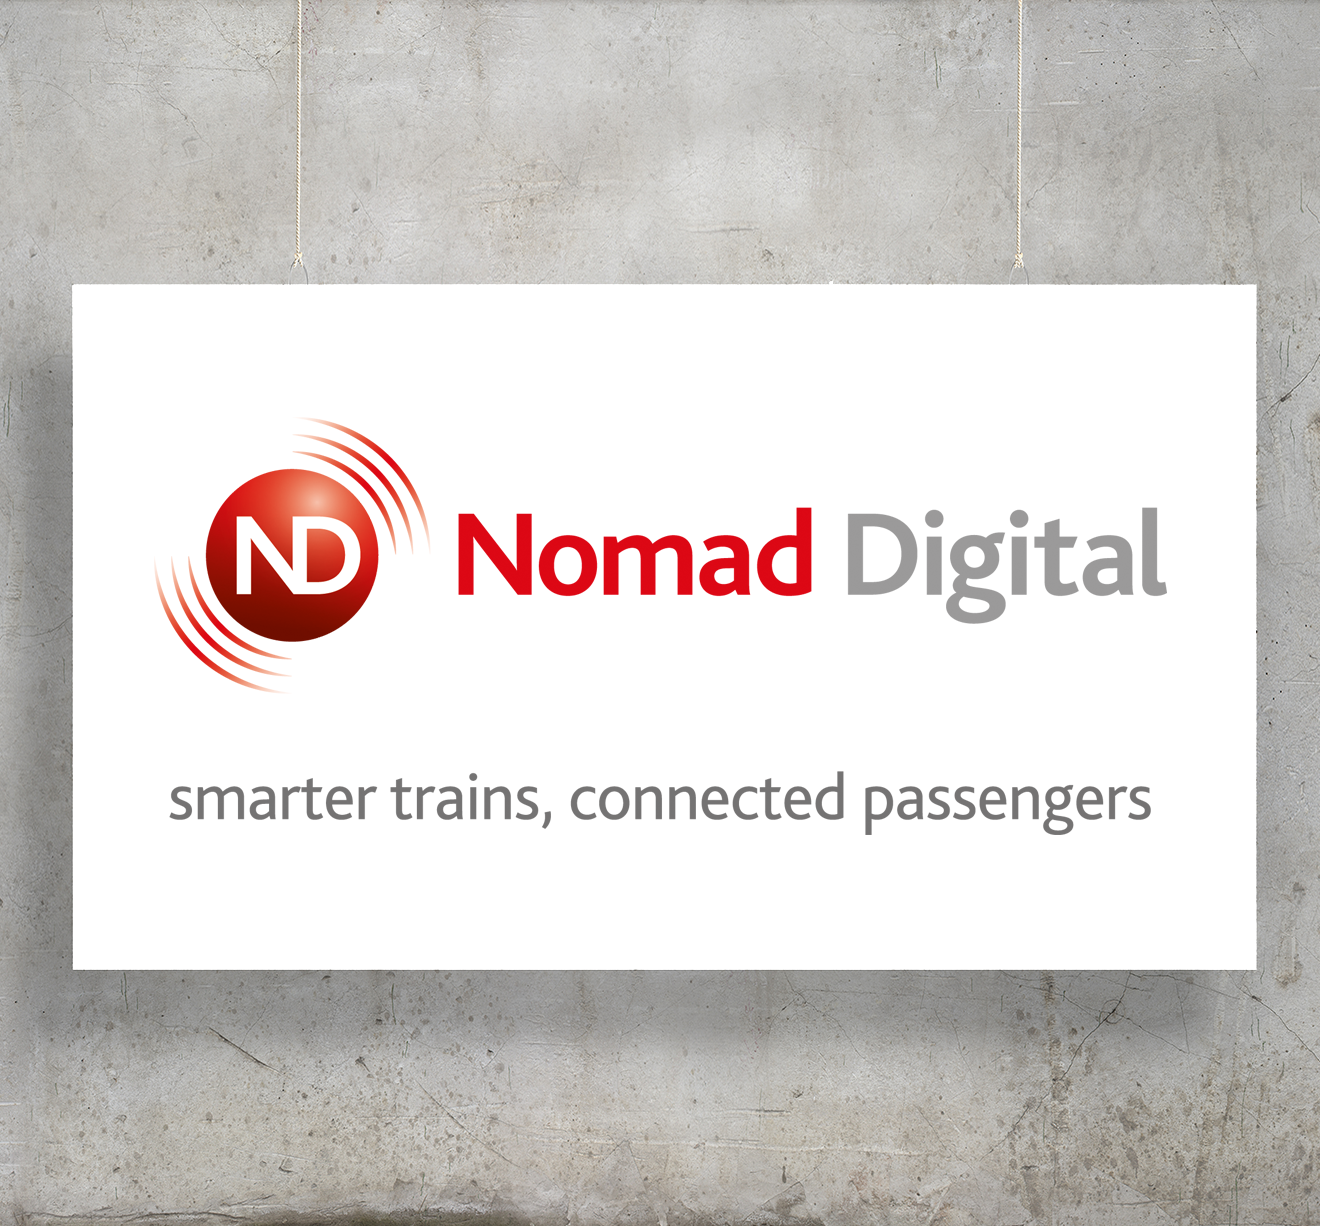 pdf nomad review